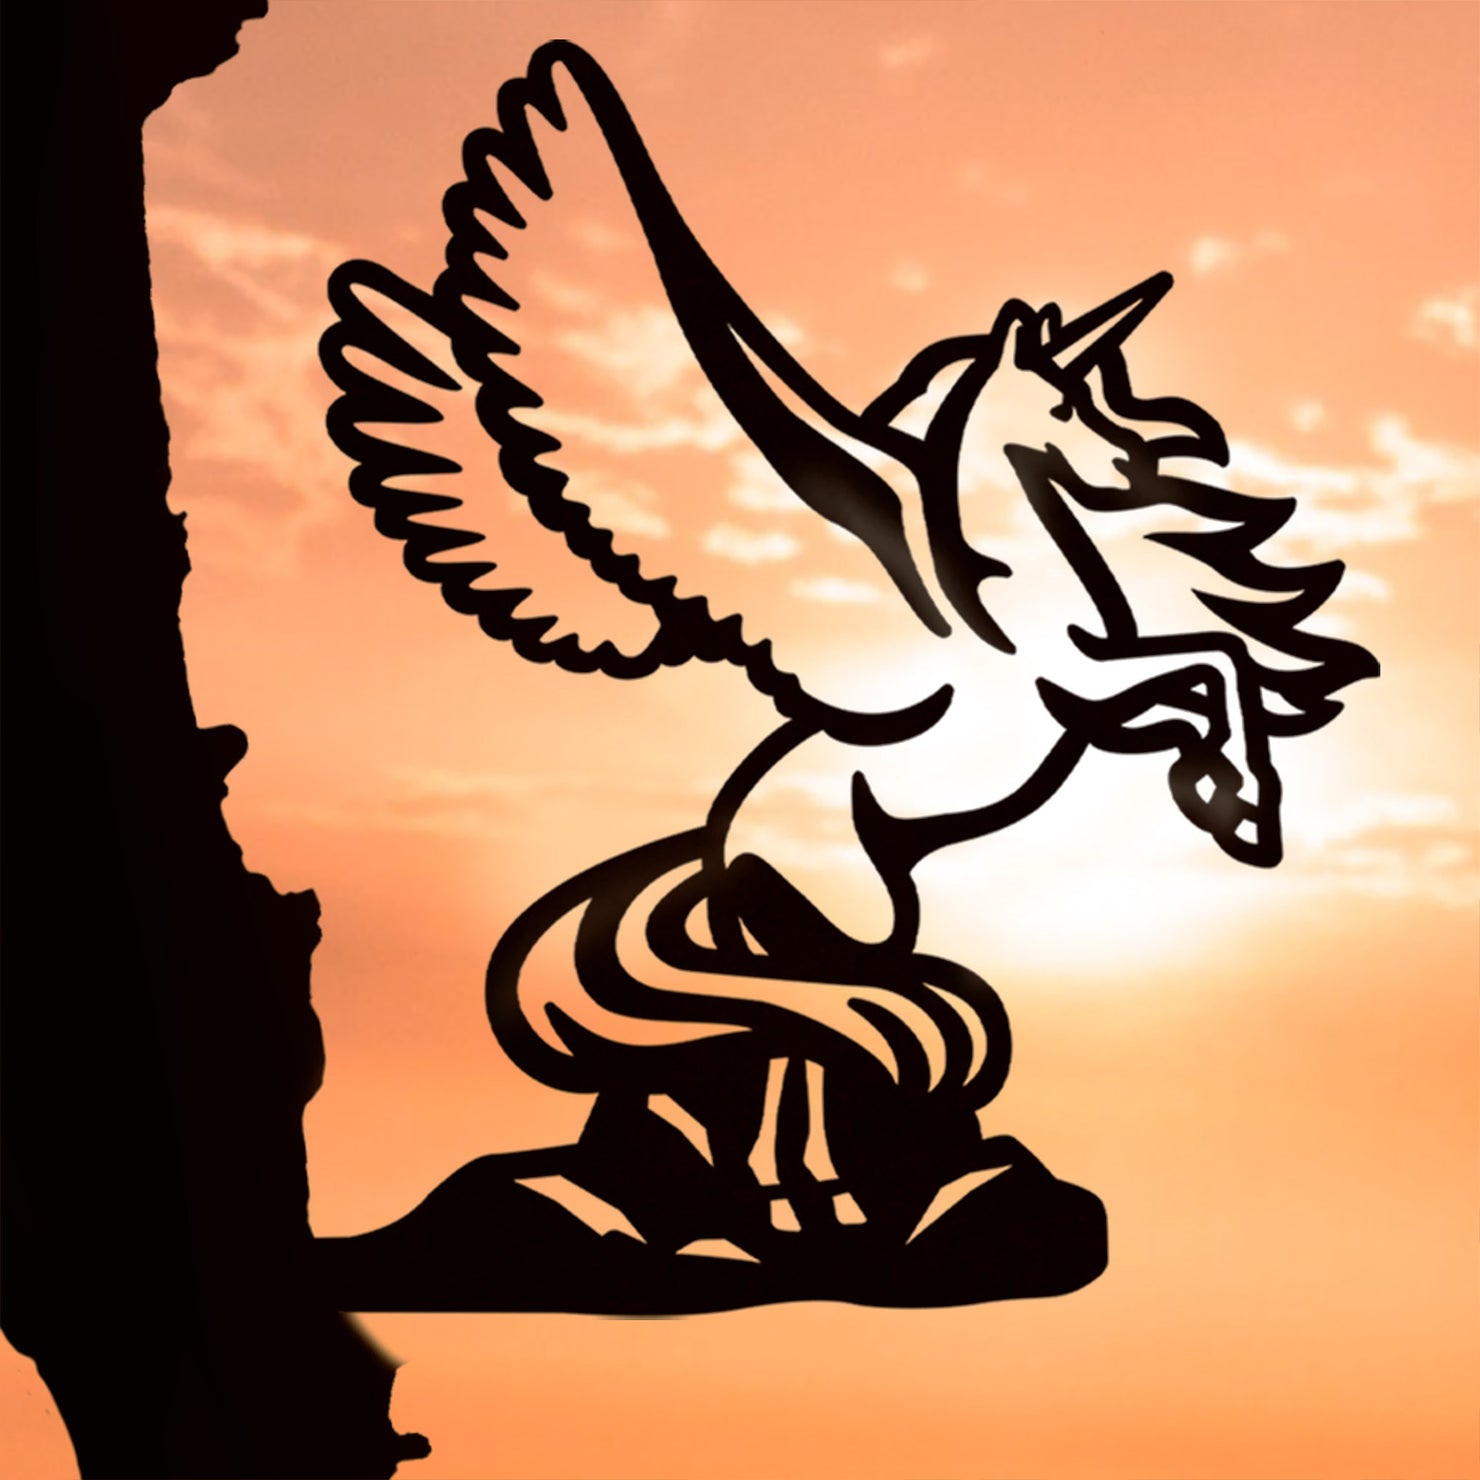 Mythical Creatures: Pegasus